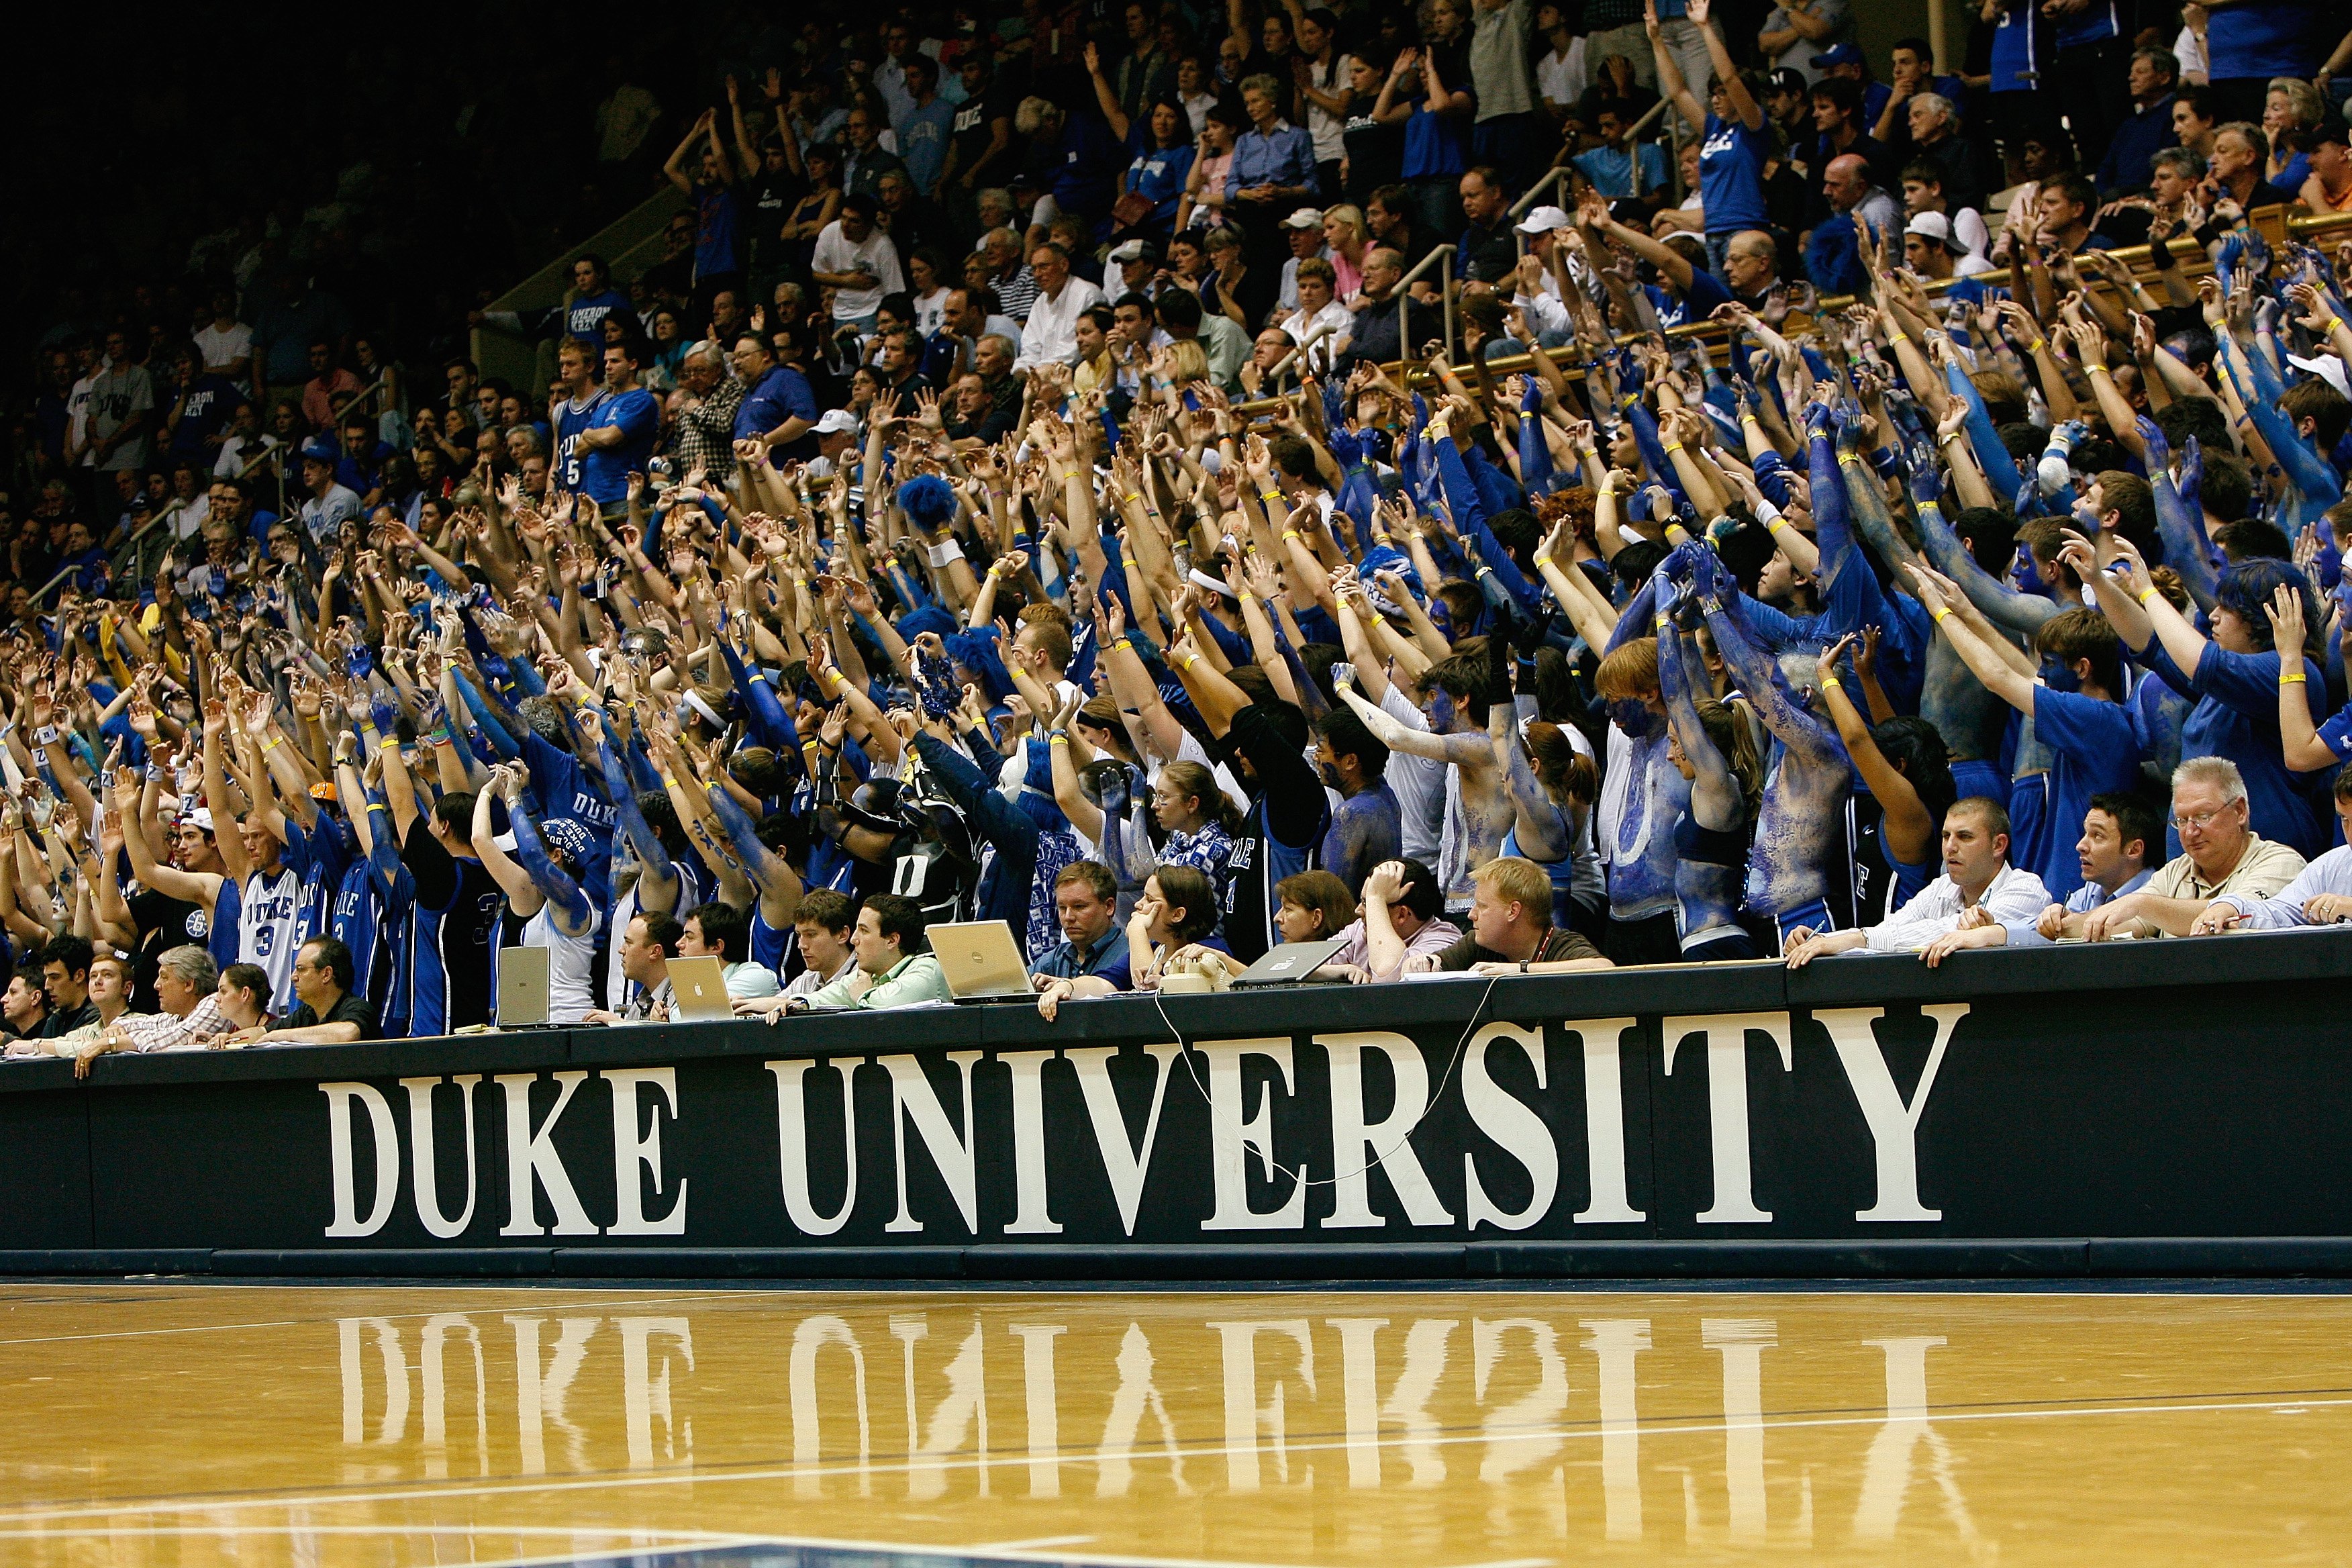 DURHAM, NC - FEBRUARY 11:  Duke Blue Devils fans hold up their hands during the game against the North Carolina Tar Heels on February 11, 2009 at Cameron Indoor Stadium in Durham, North Carolina.  (Photo by Kevin C. Cox/Getty Images)